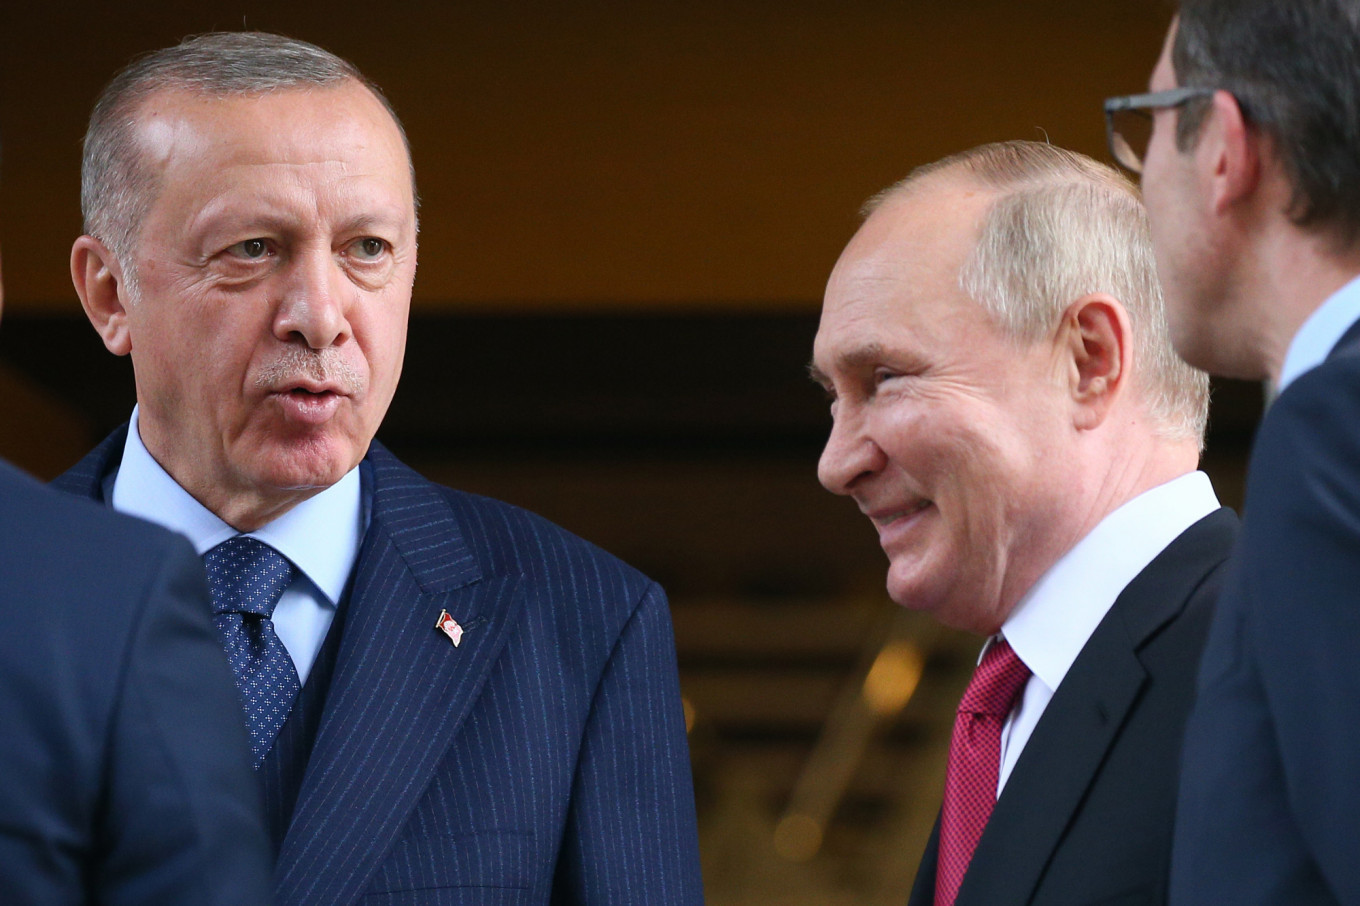 Erdogan Urges 'Urgent General Ceasefire' in Putin Call - The Moscow Times